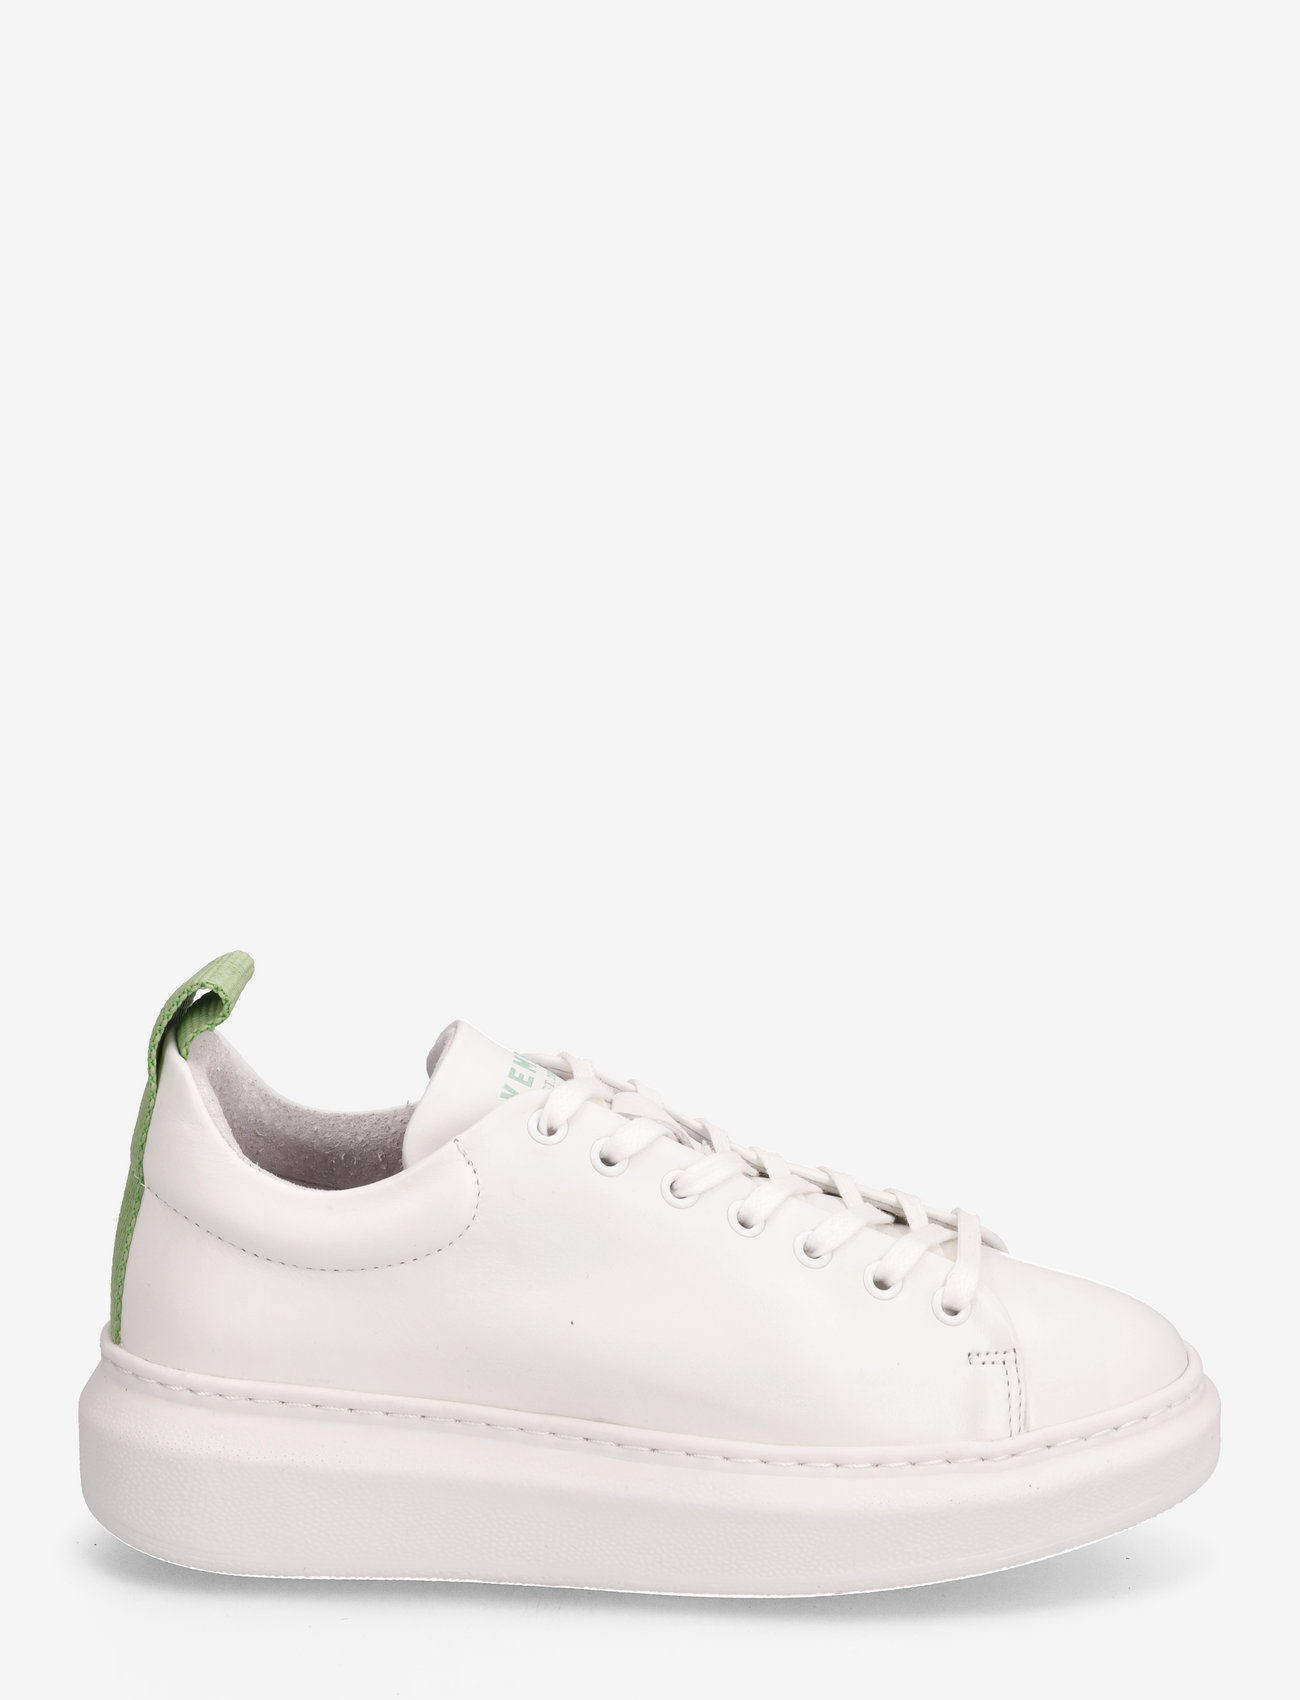 Pavement - Dee color - niedrige sneakers - white/green 424 - 1